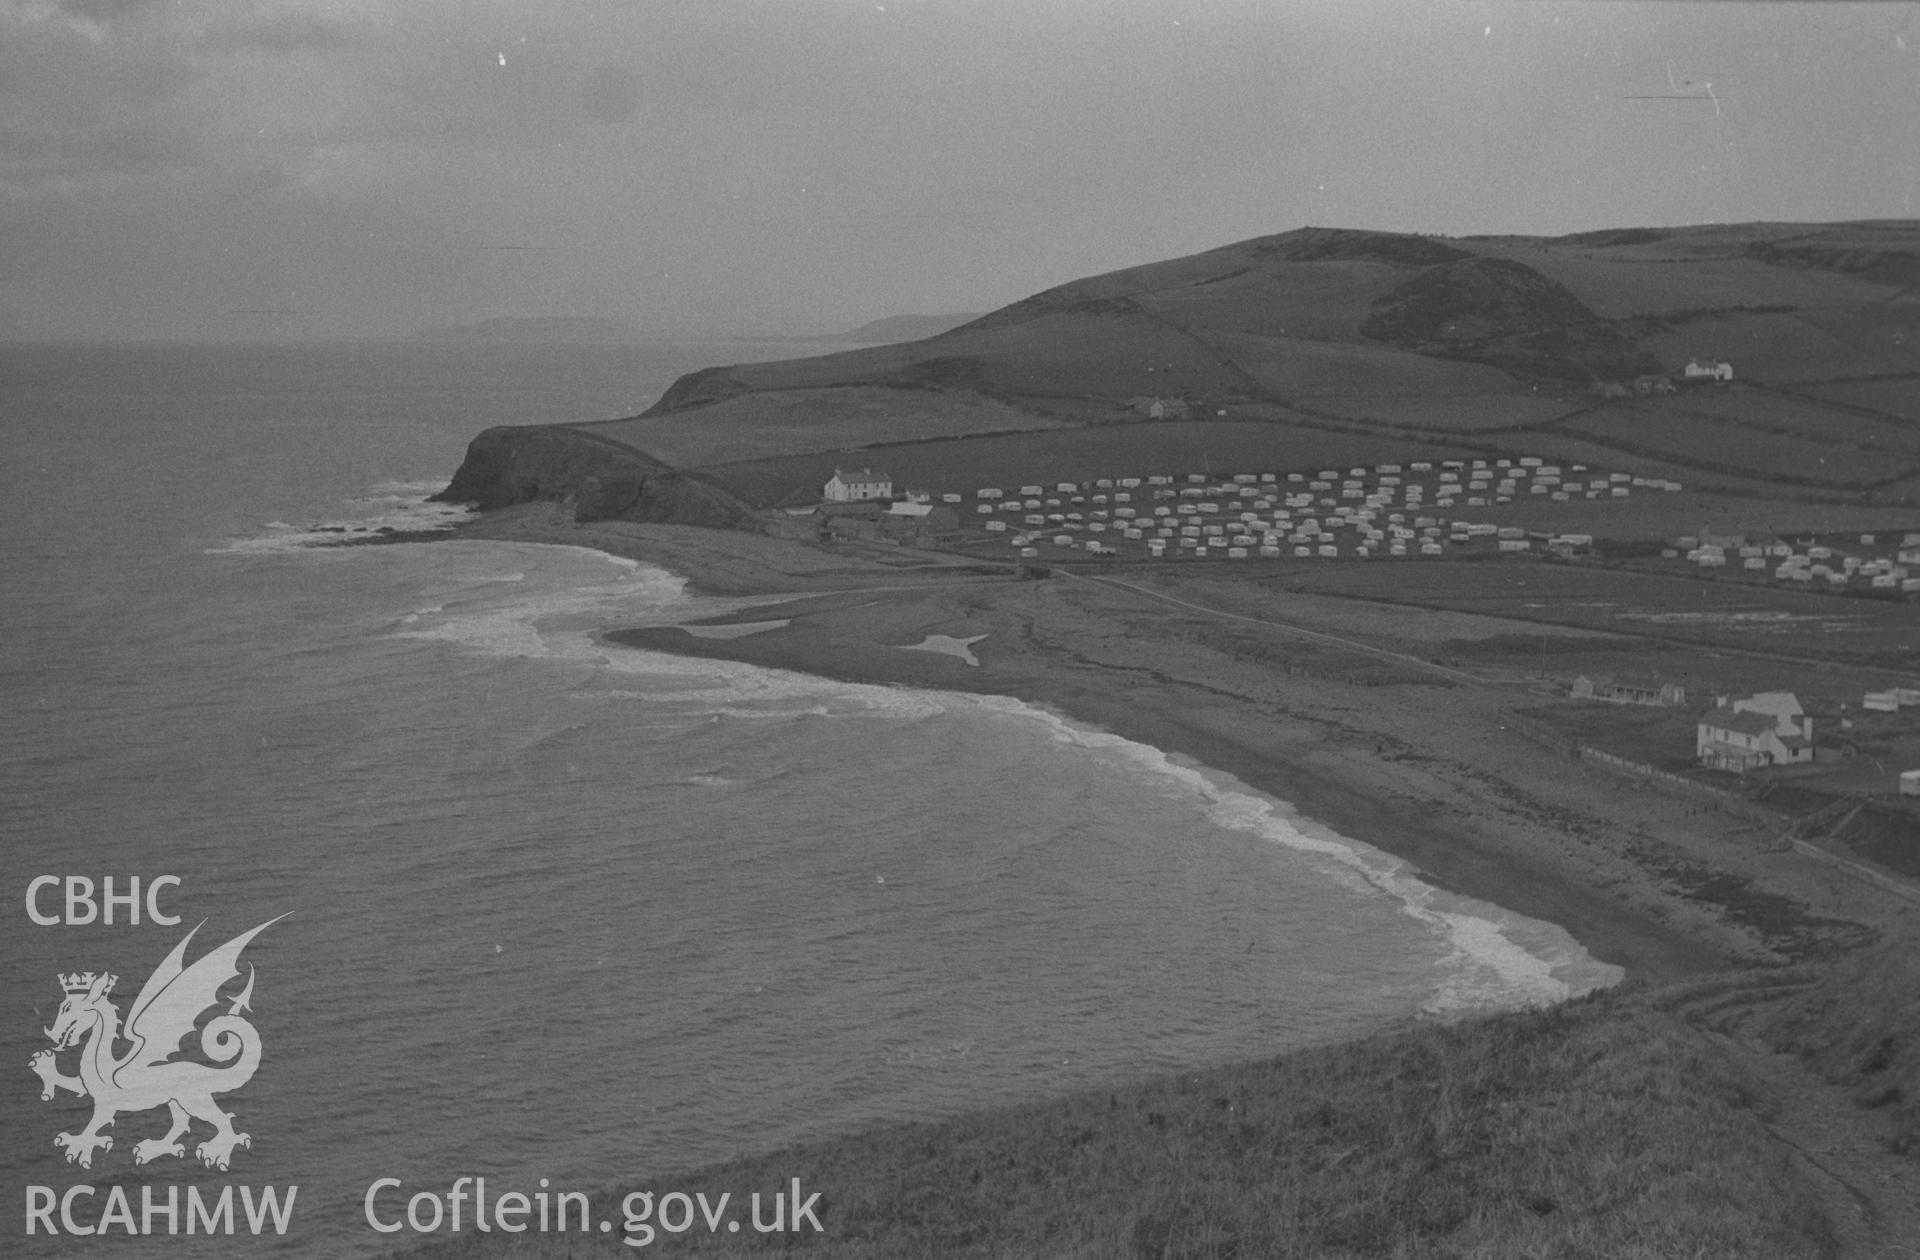 Digital copy of a black and white negative showing Clarach Bay with caravans. Photographed by Arthur O. Chater on 25th December 1964 from the cliff path at Grid Reference SN 5865 8346, looking north.